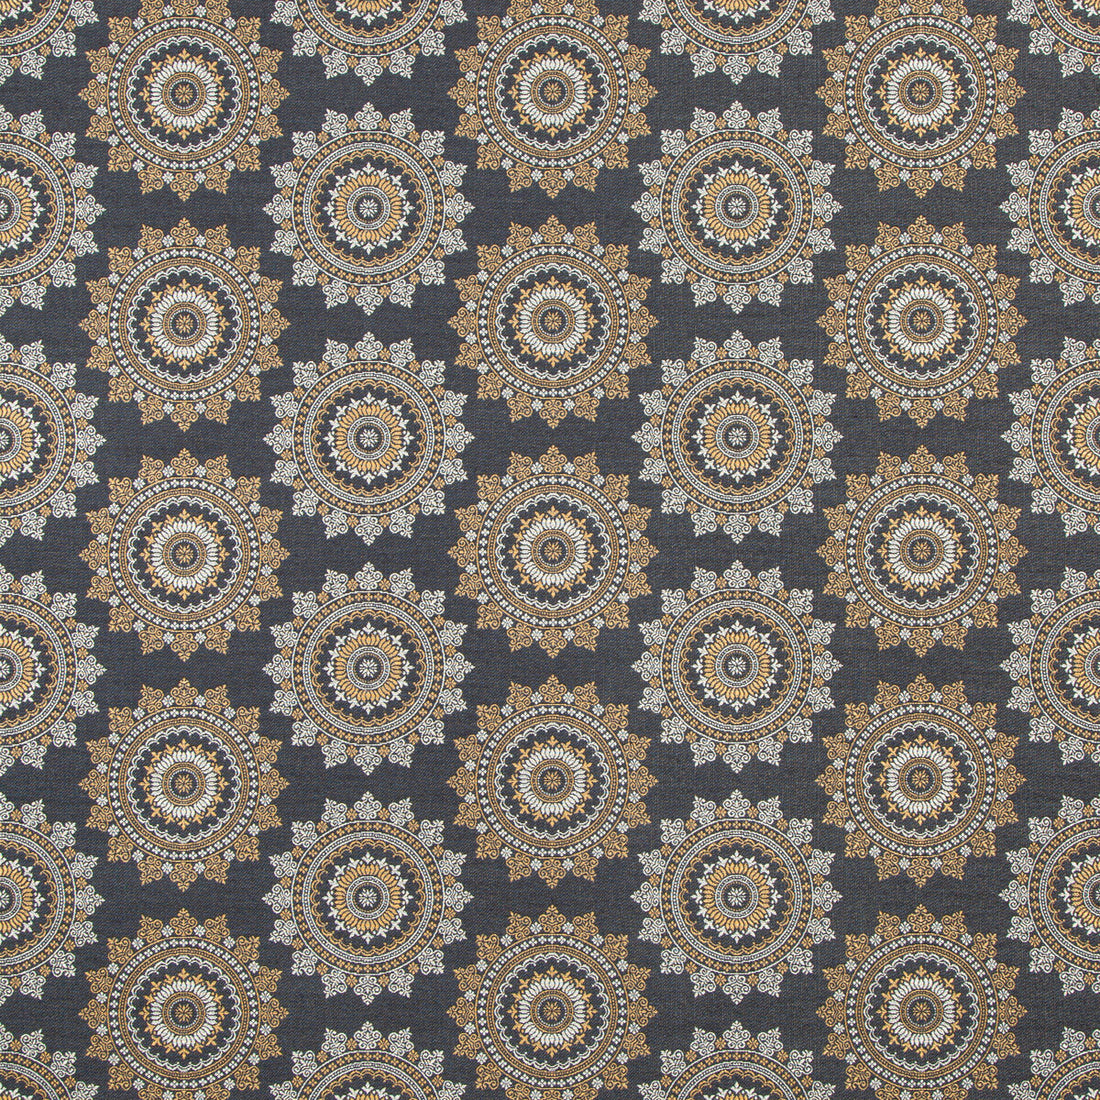 Piatto fabric in midnight color - pattern 35865.50.0 - by Kravet Contract in the Gis Crypton Green collection